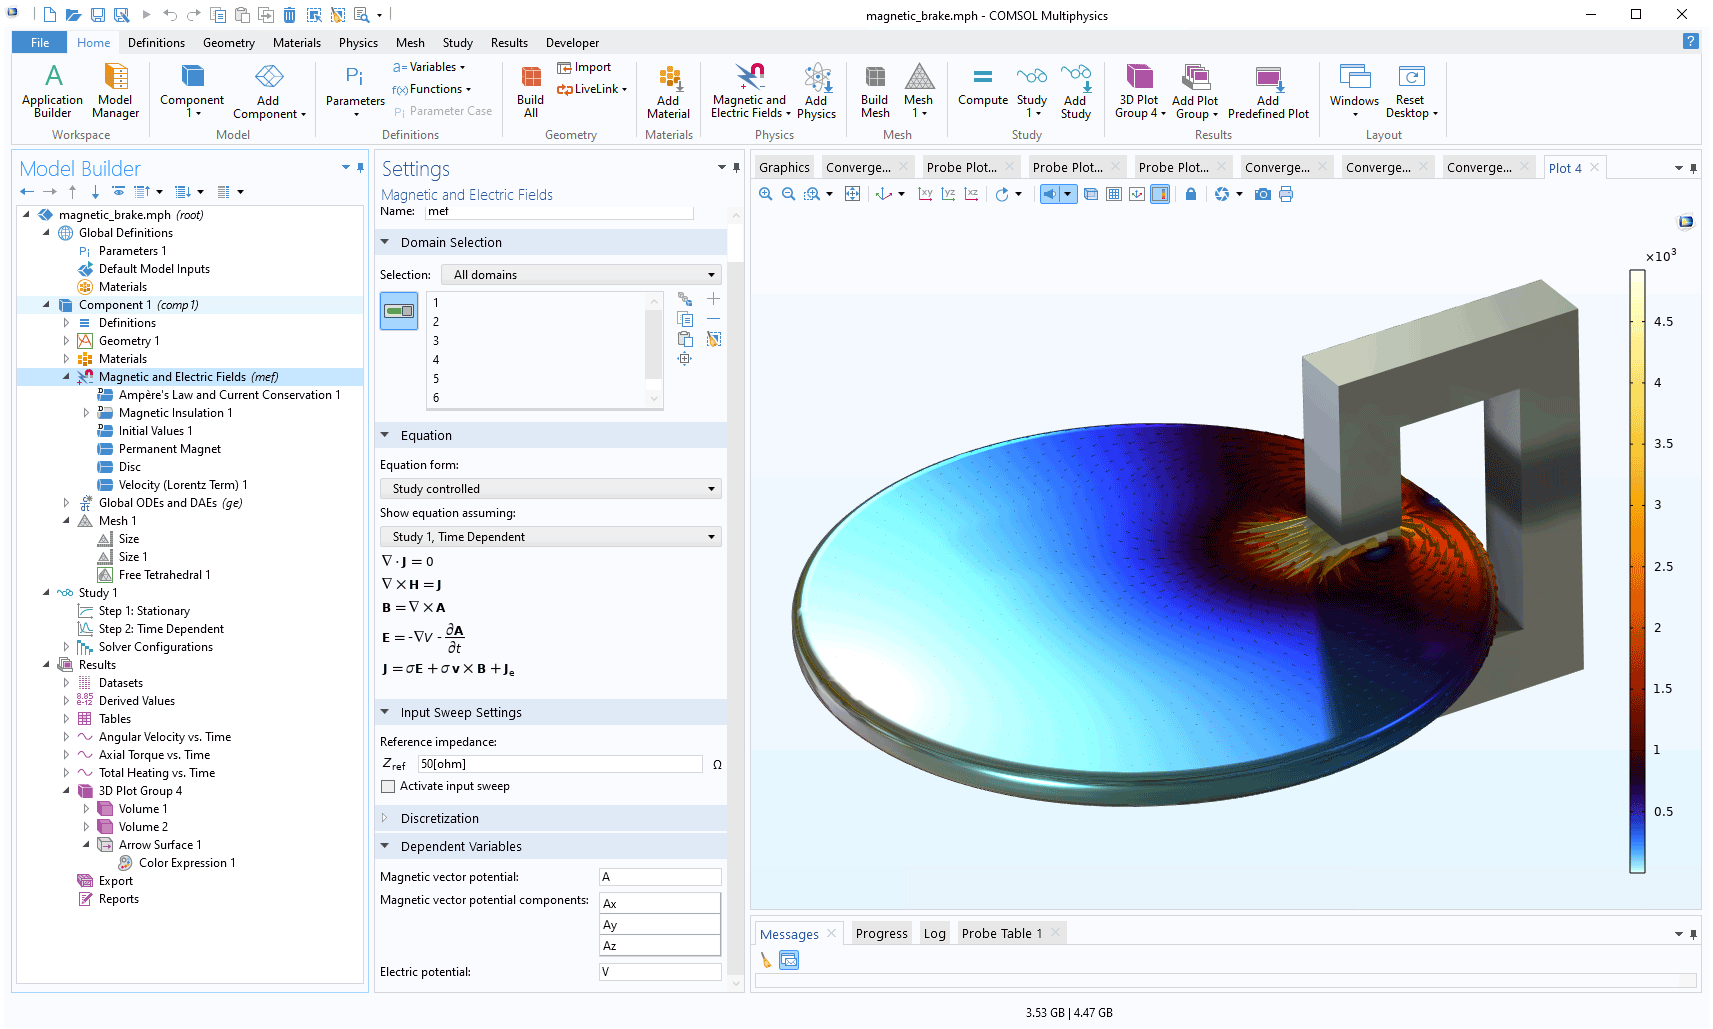 The COMSOL Multiphysics UI showing the Model Builder with the Magnetic and Electric Fields node highlighted, the corresponding Settings window, and a magnetic brake model in the Graphics window.